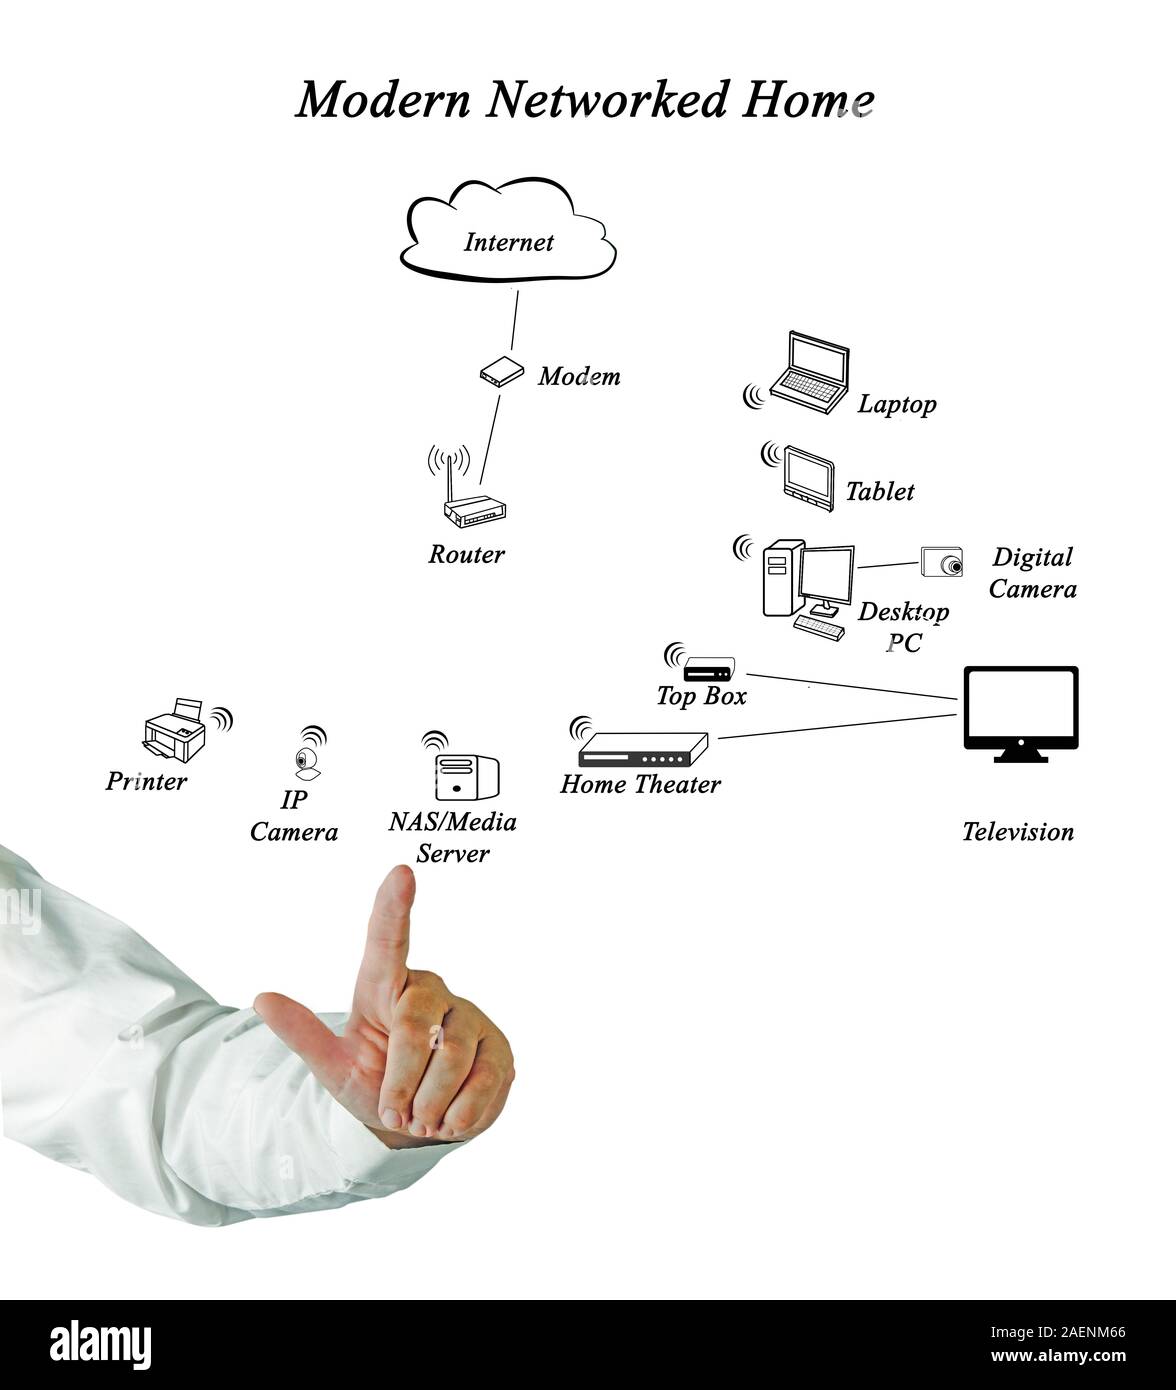 Diagram of Networked Home Stock Photo